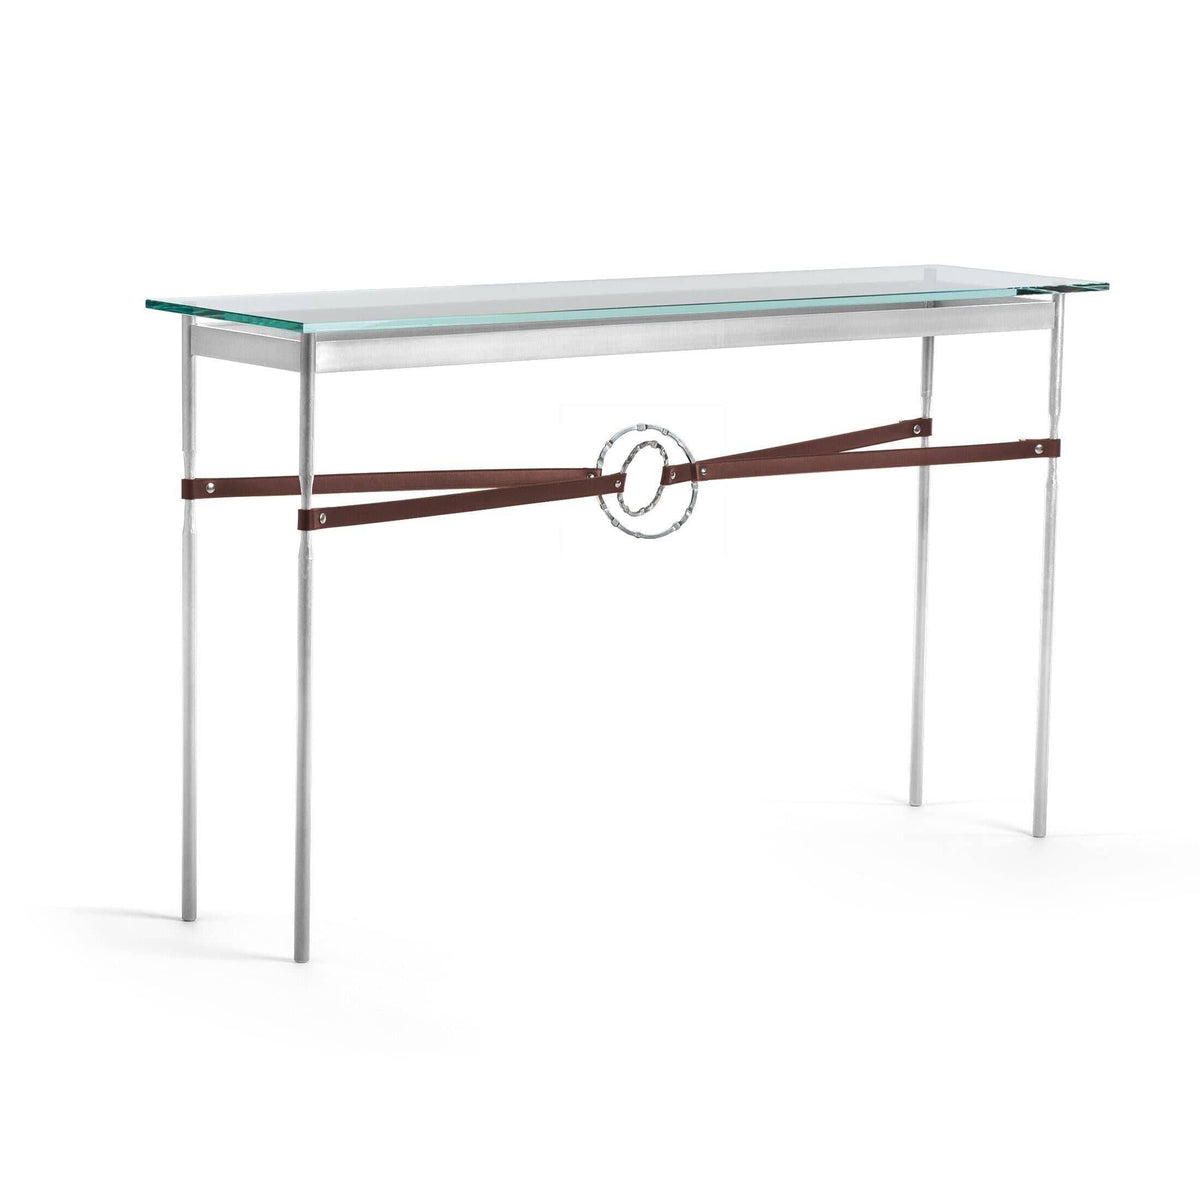 Hubbardton Forge - Equus Brown Leather Console Table - 750118-85-85-LB-VA0714 | Montreal Lighting & Hardware